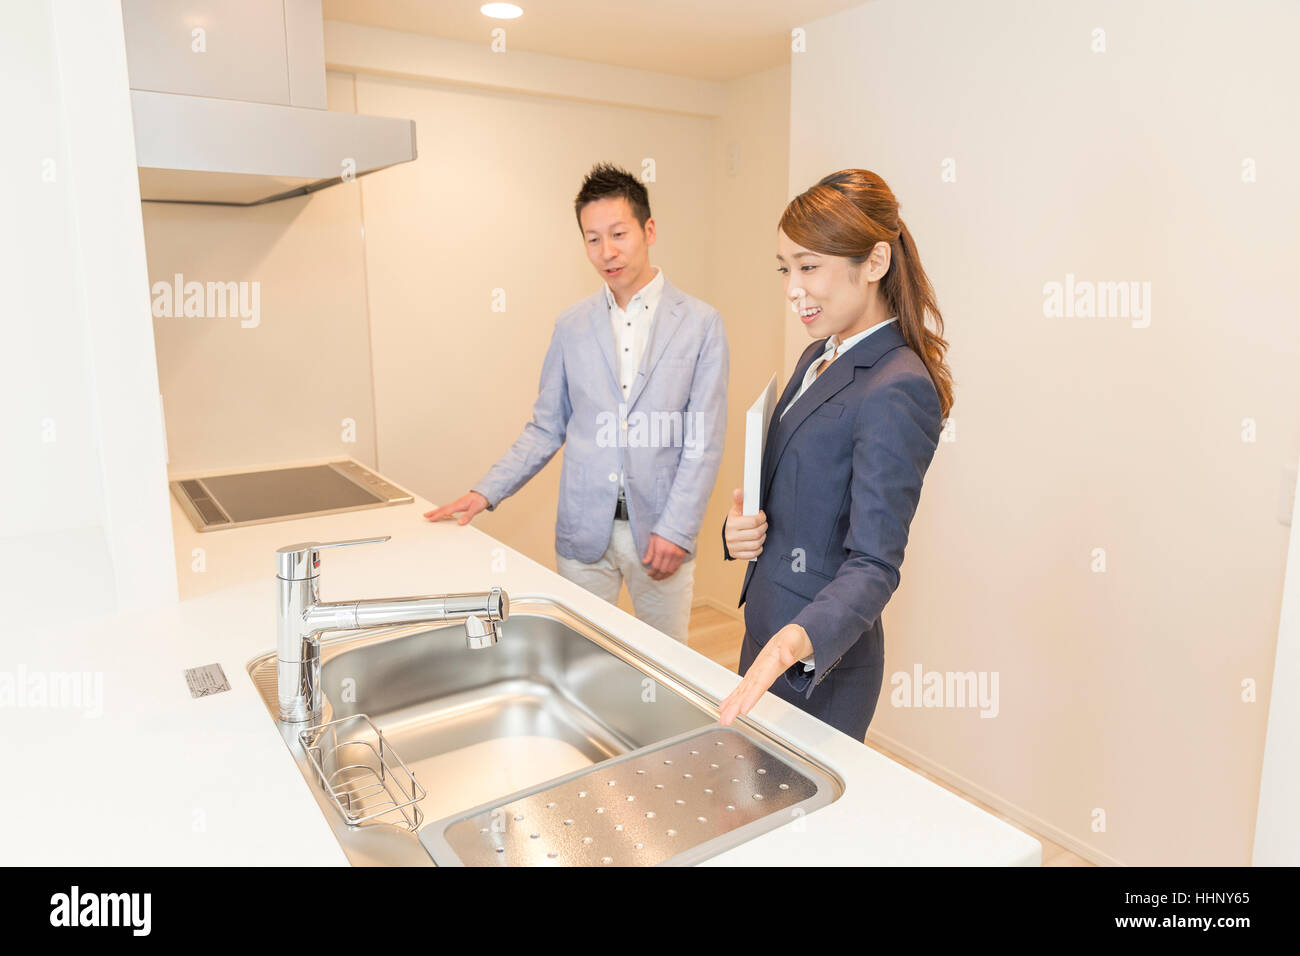 Real Estate Agent Showing Kitchen to Buyer Stock Photo